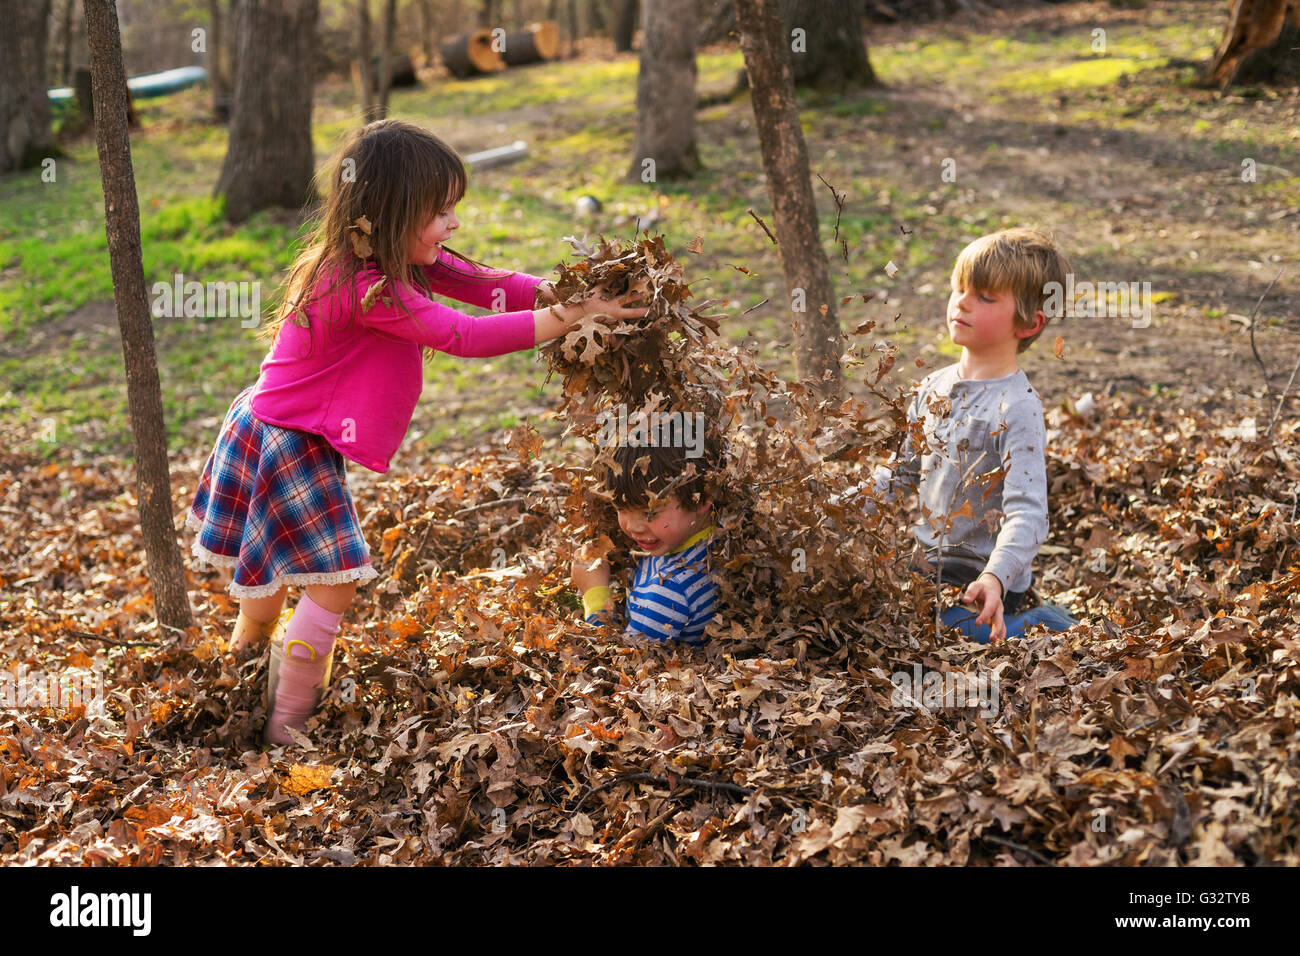 Three children playing with autumn leaves in park Stock Photo